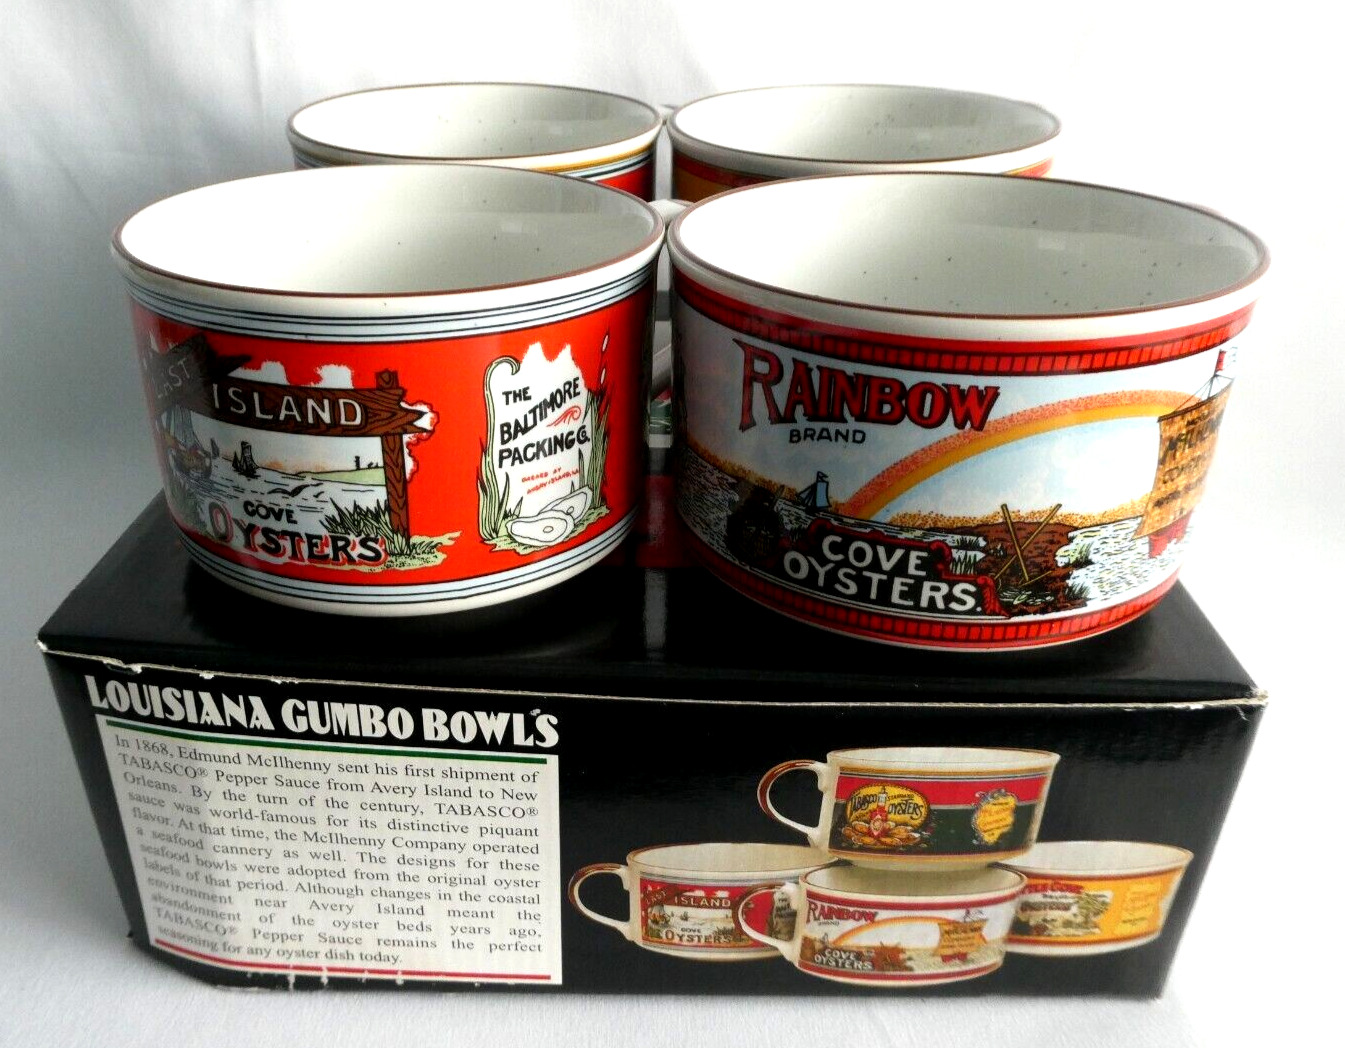 Set of 4 Tabasco Brand Louisiana Gumbo Bowls McIlhenny Co Seafood Oyster Dishes